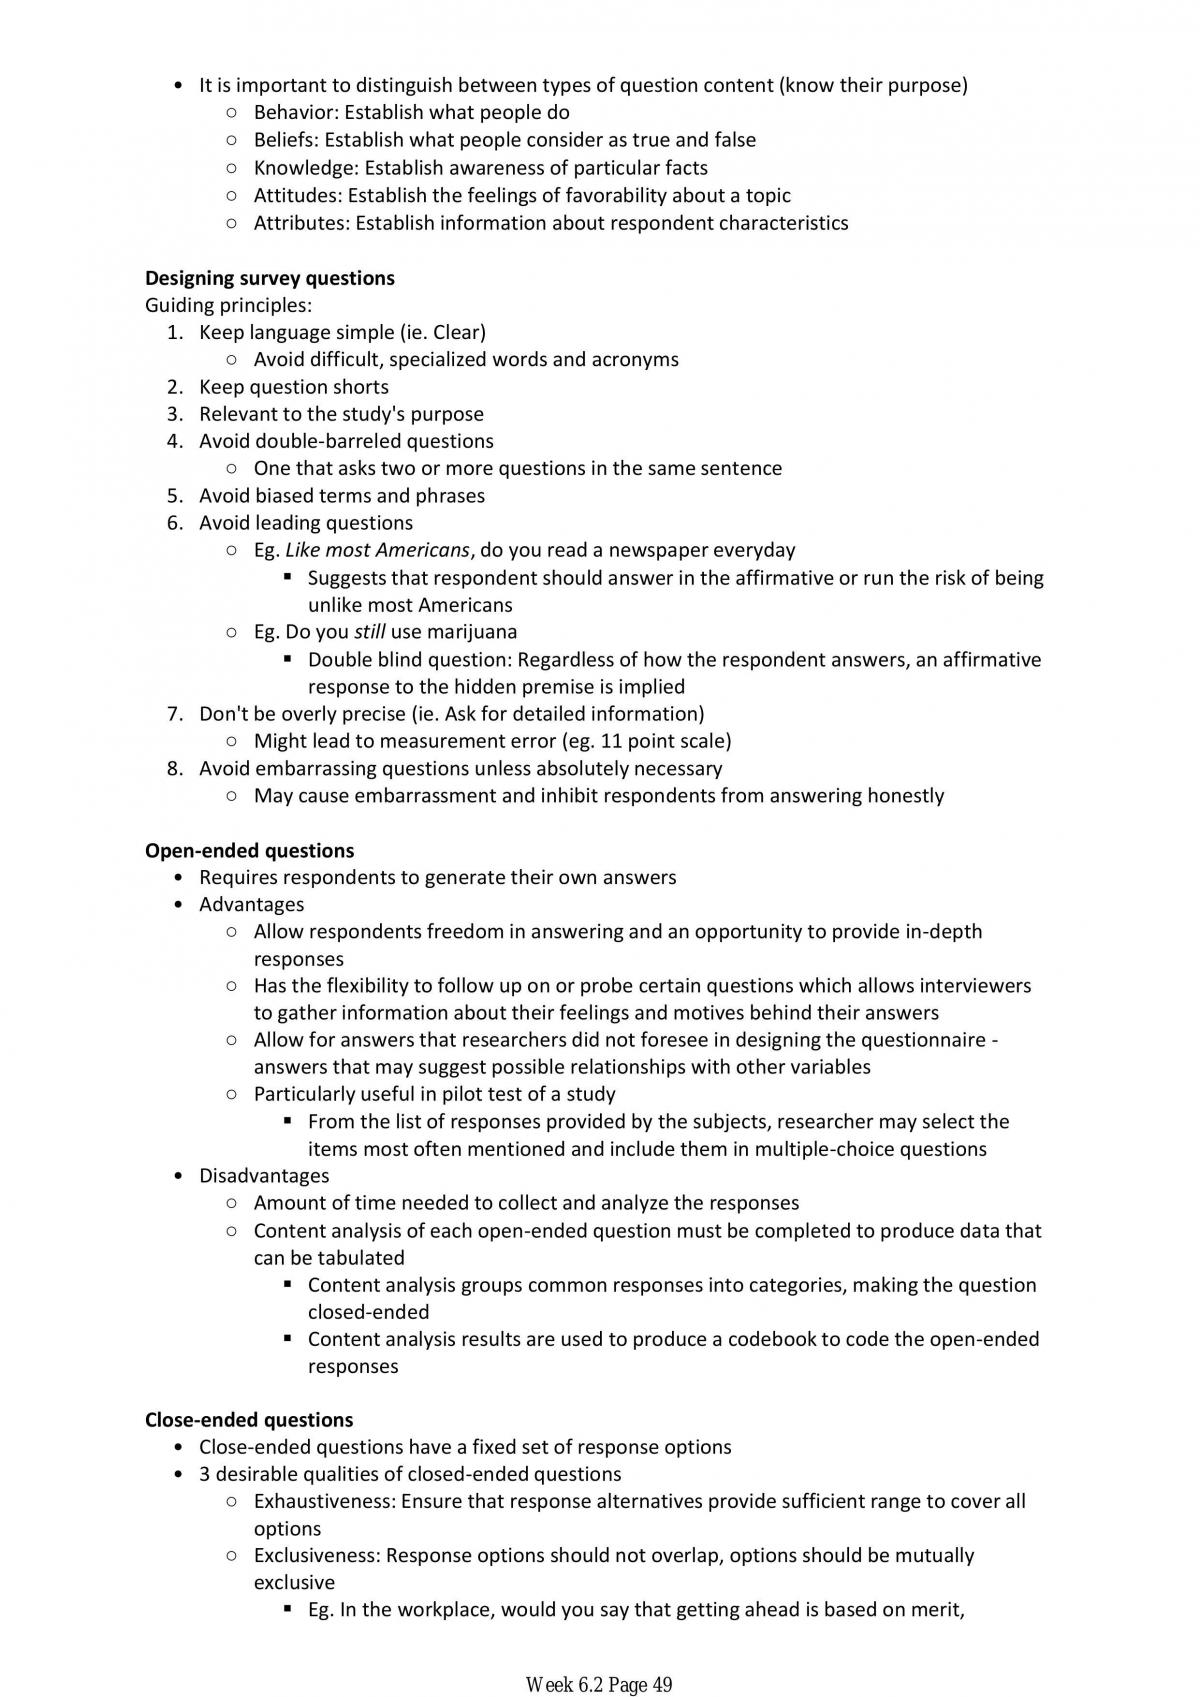 CS2008 Fundamentals of Research notes - Page 49